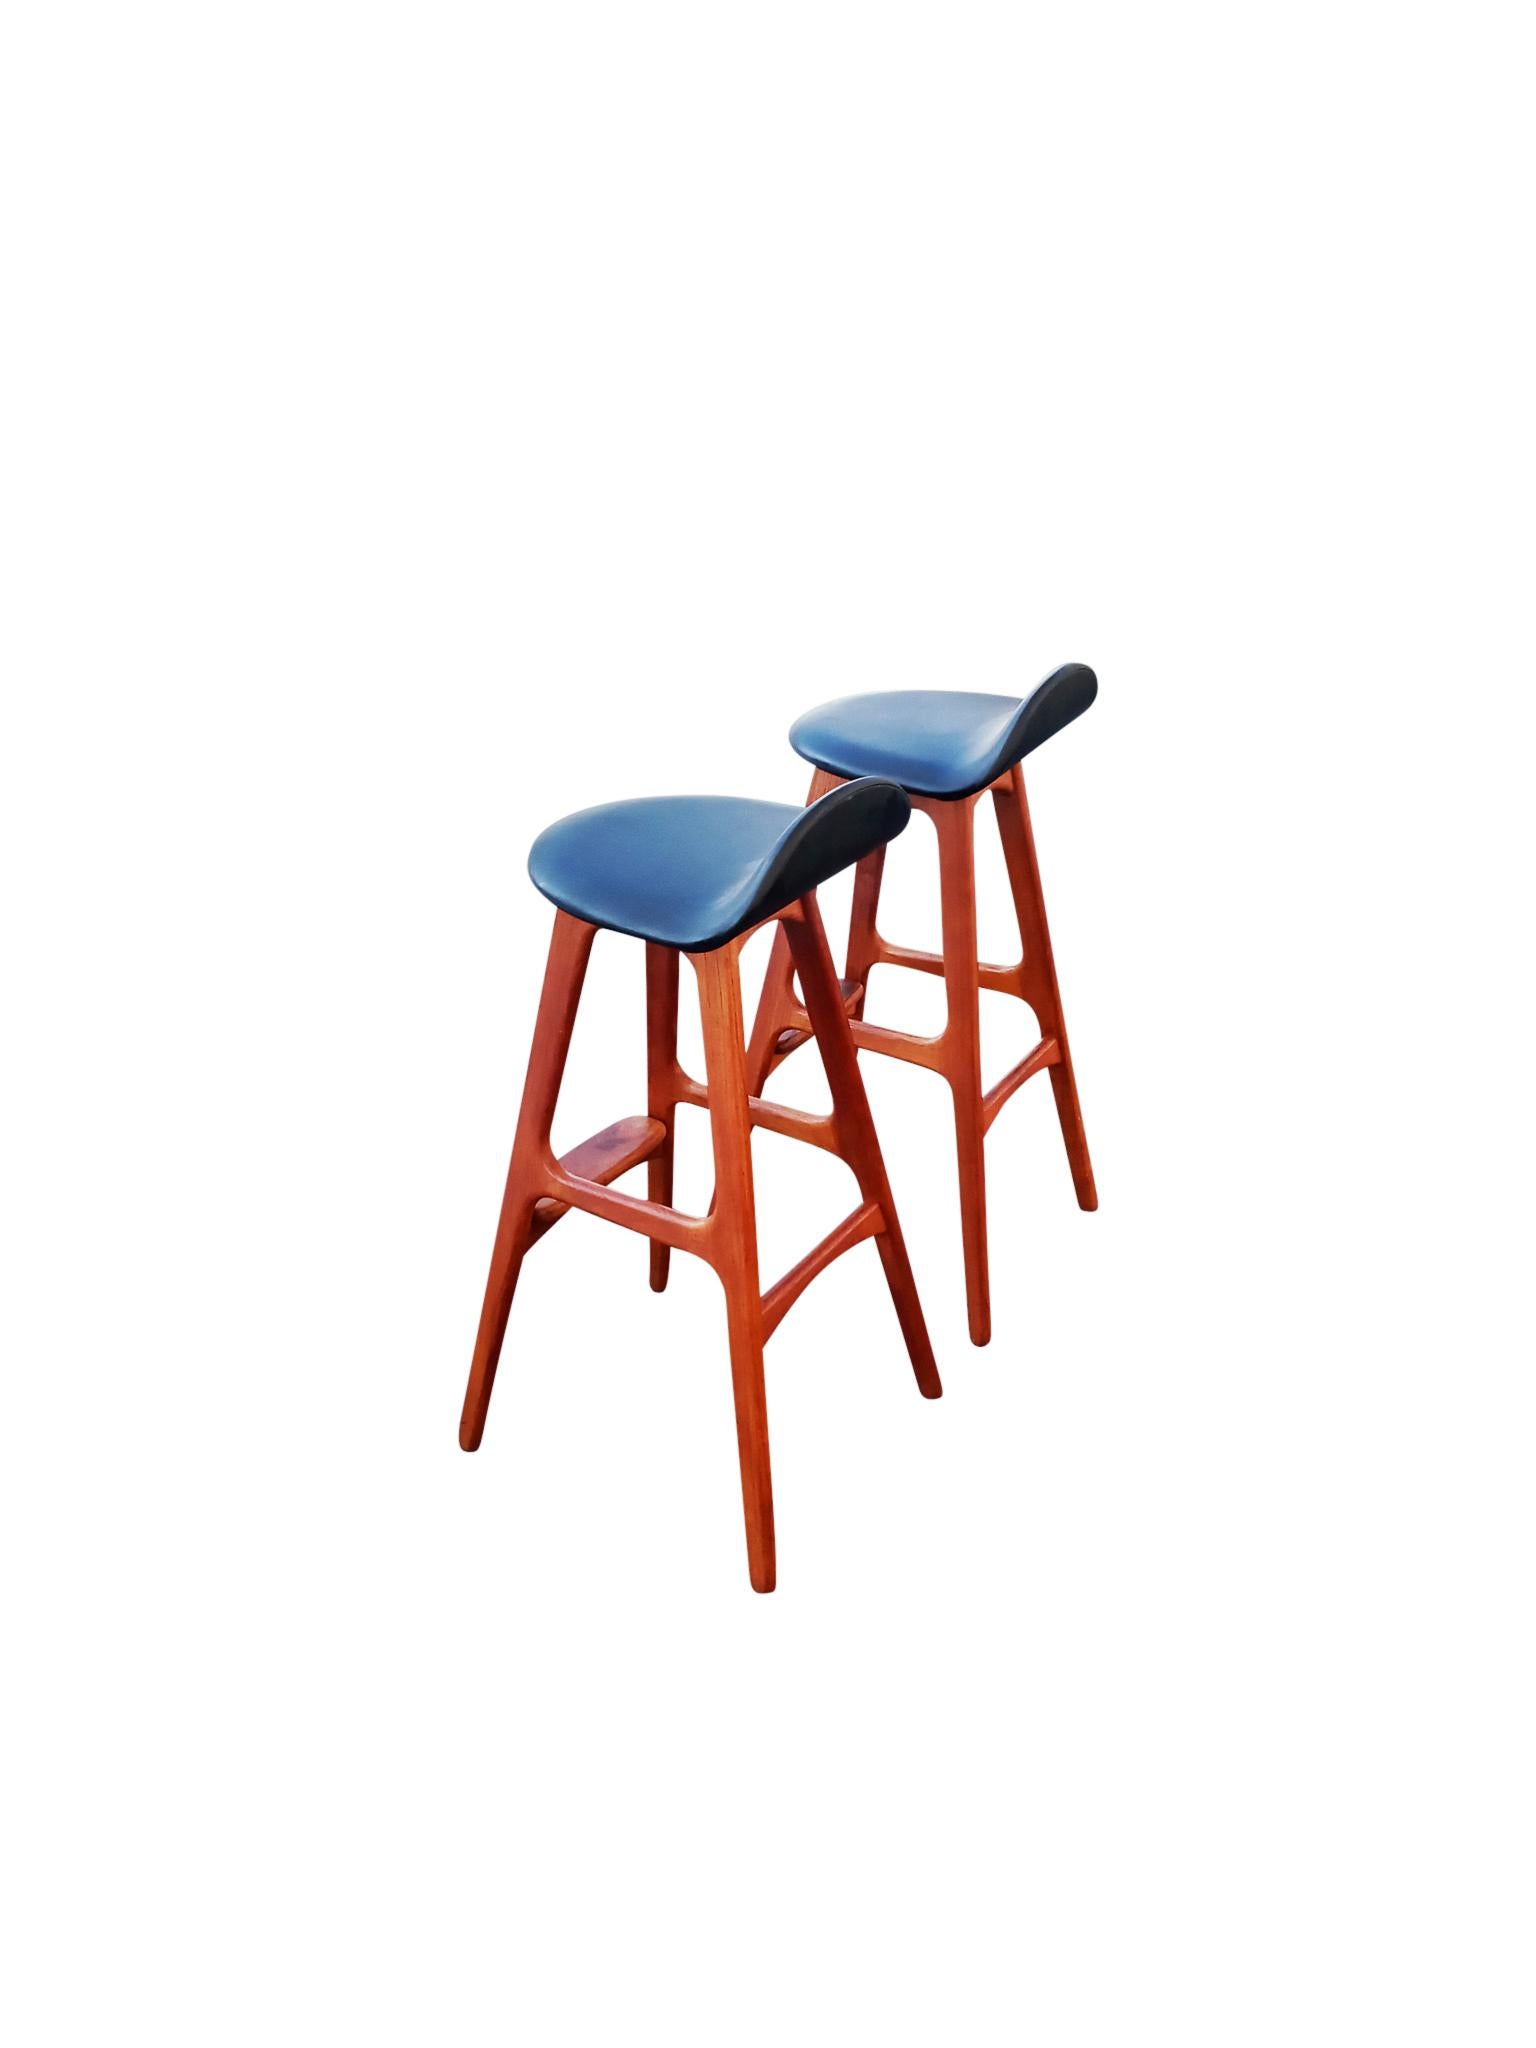 Erik Buck or Buch Oddense Maskinsnedkeri A/S Danish Pair Rosewood Leather Stools In Good Condition In Philadelphia, PA